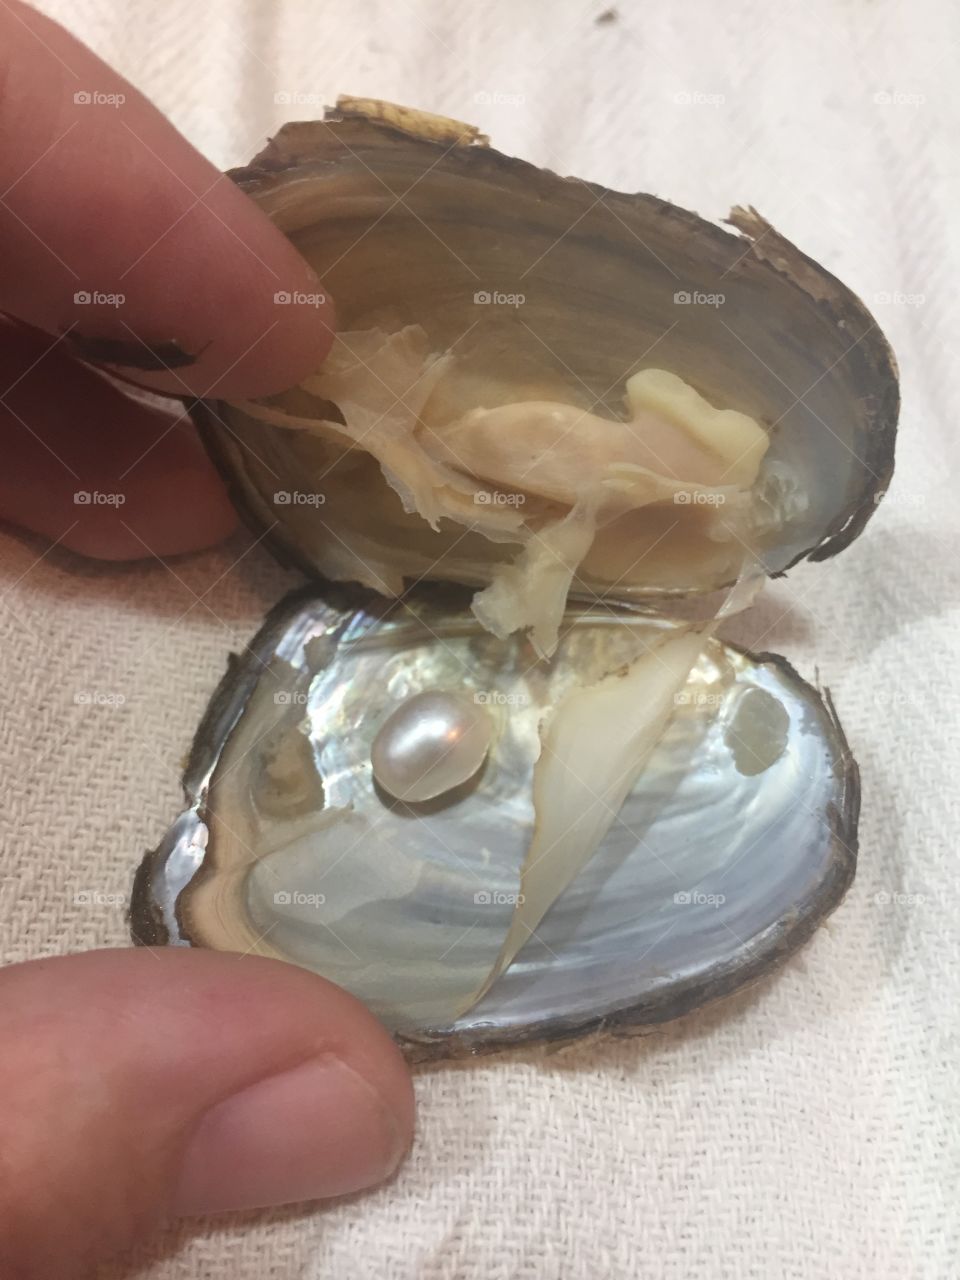 Pearl in an oyster